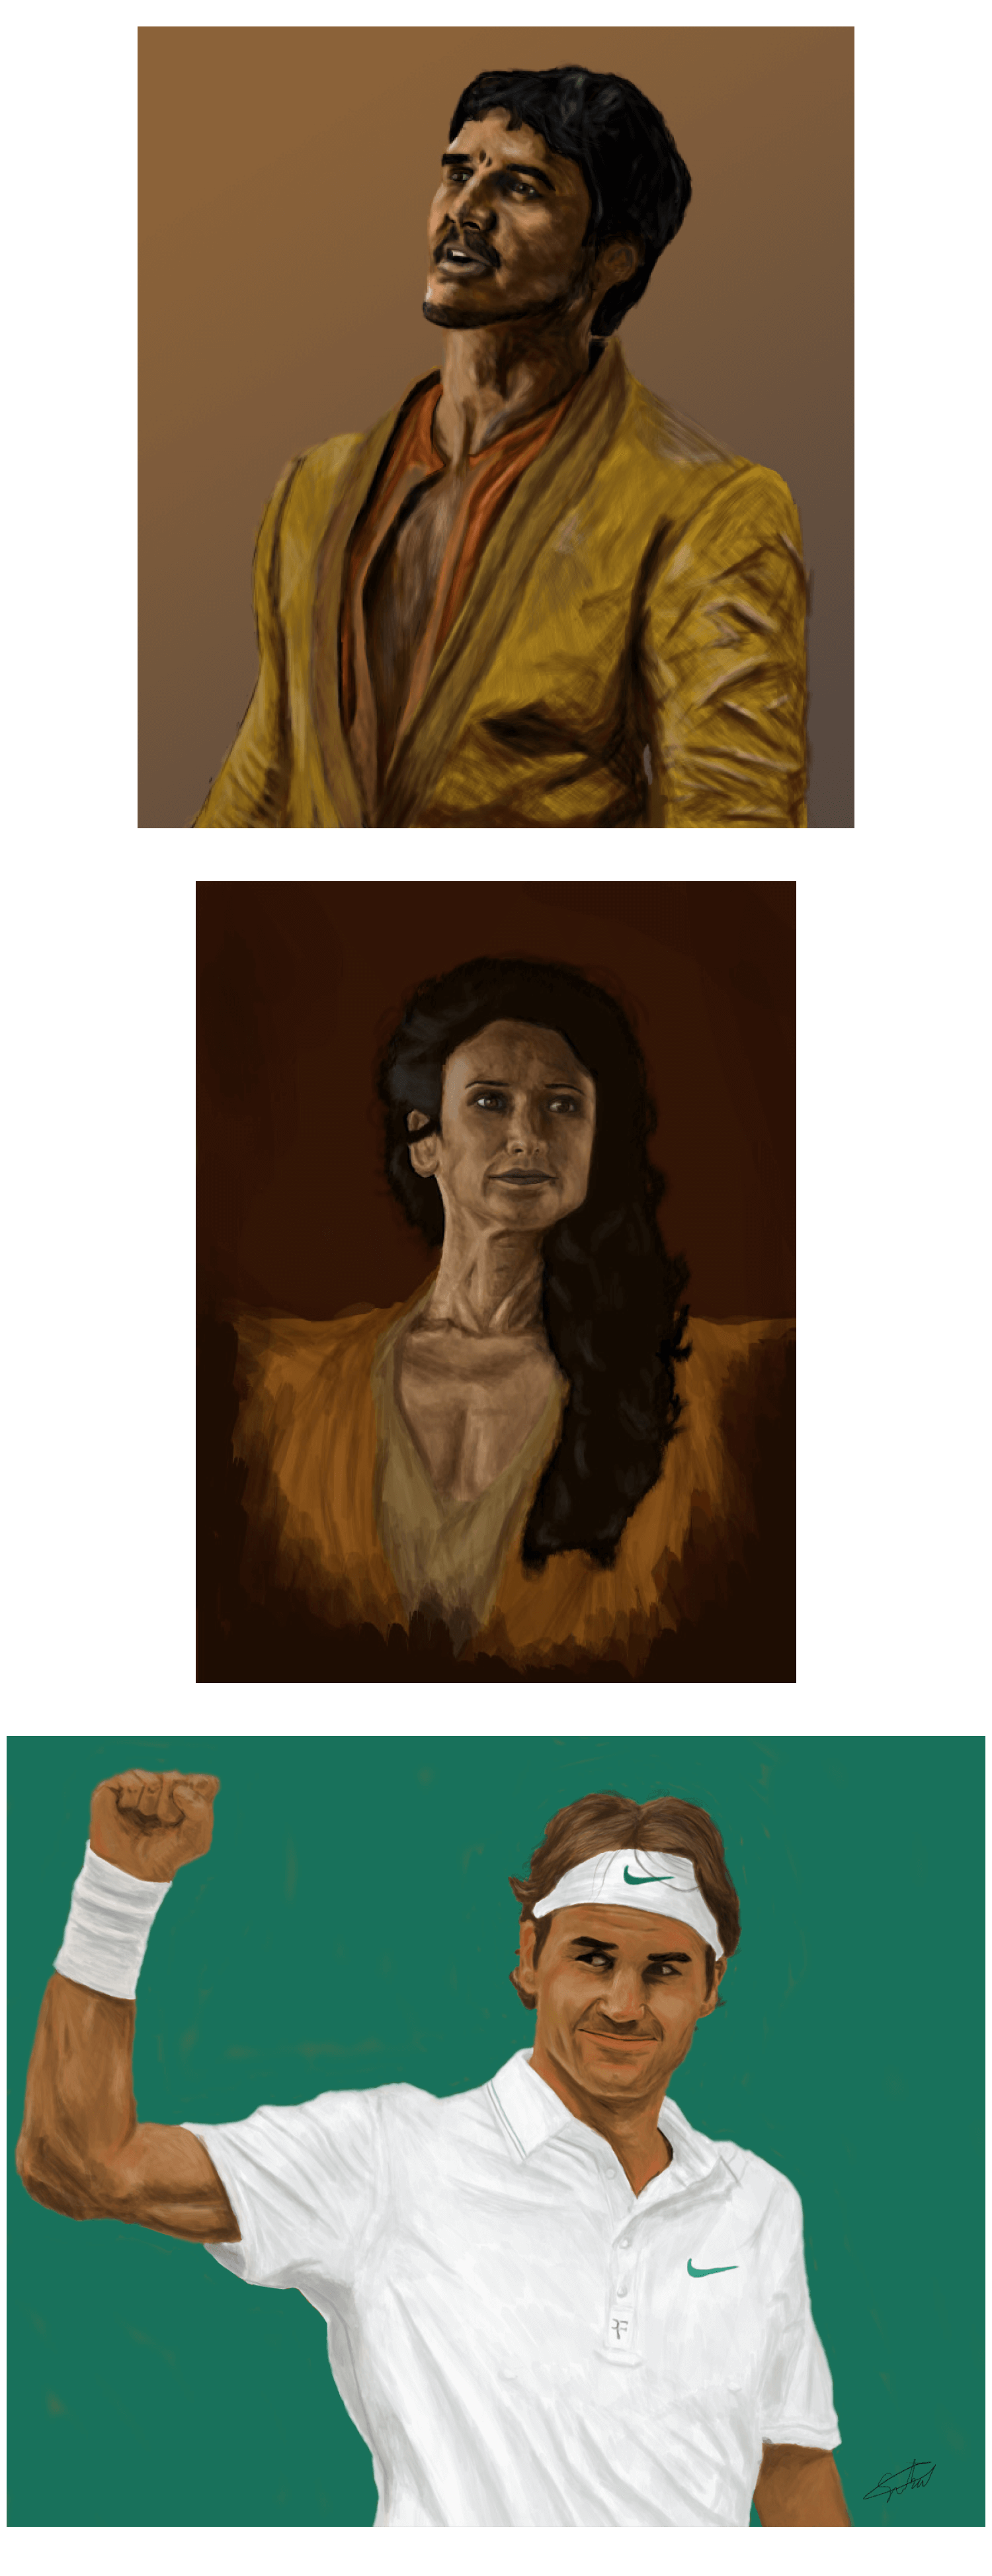 Image showing paintings of Game of Thrones characters and Roger Federer